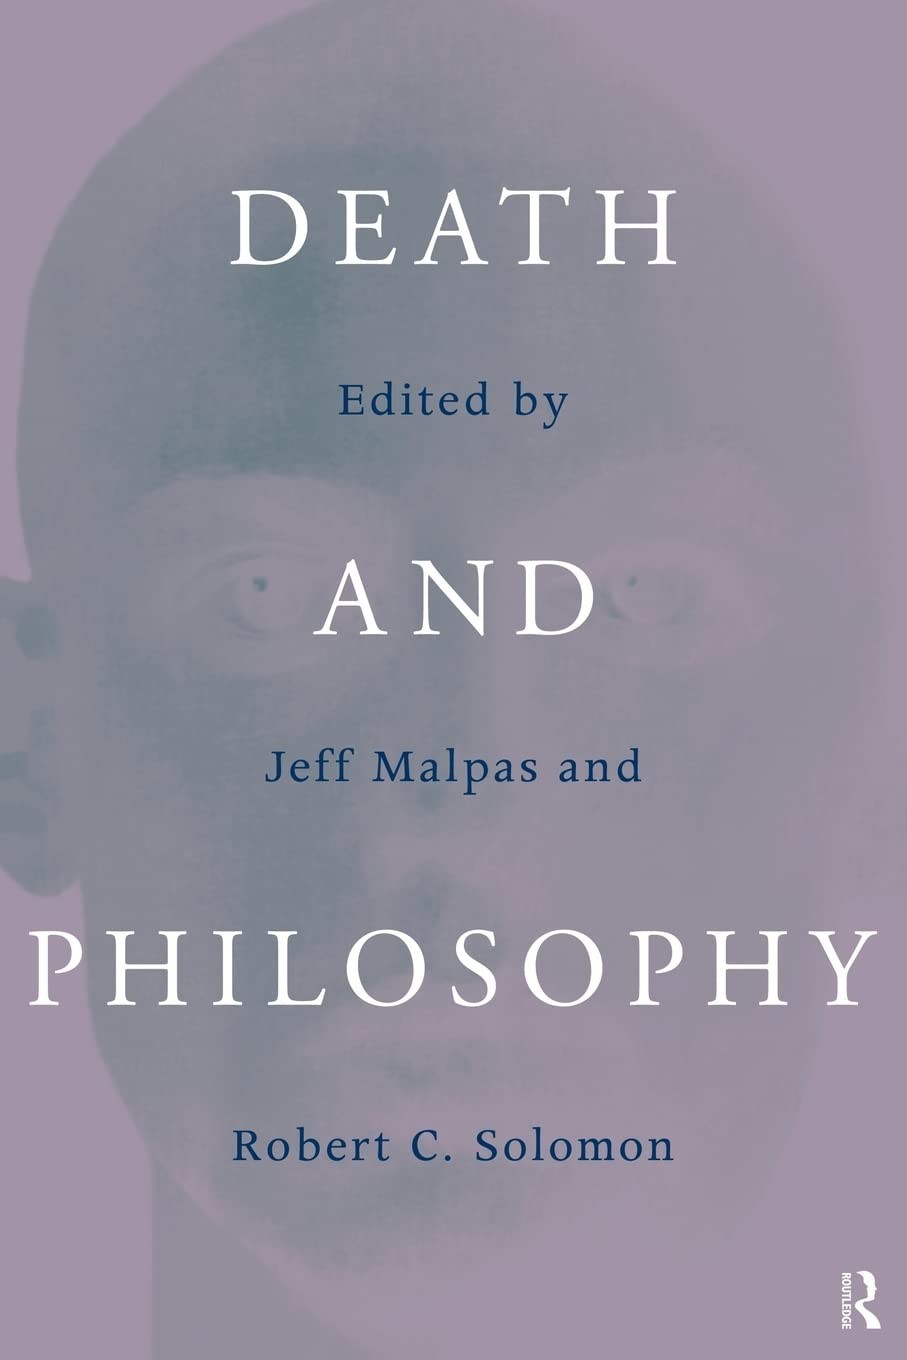 Death and Philosophy